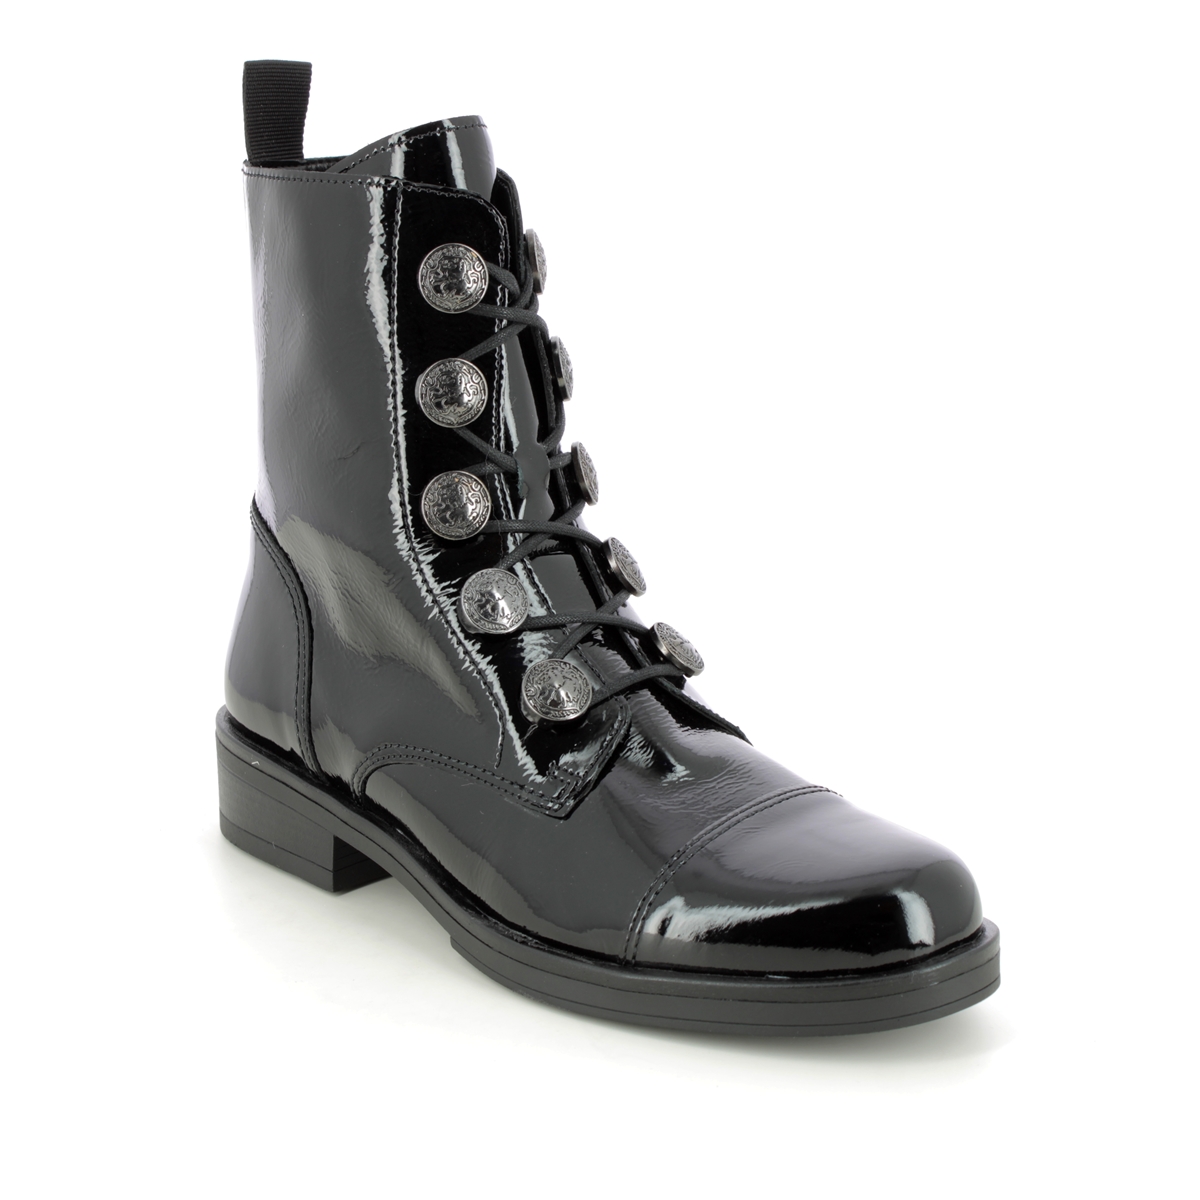 Gabor Lady Button Black patent Womens Lace Up Boots 91.796.97 in a Plain Leather in Size 7